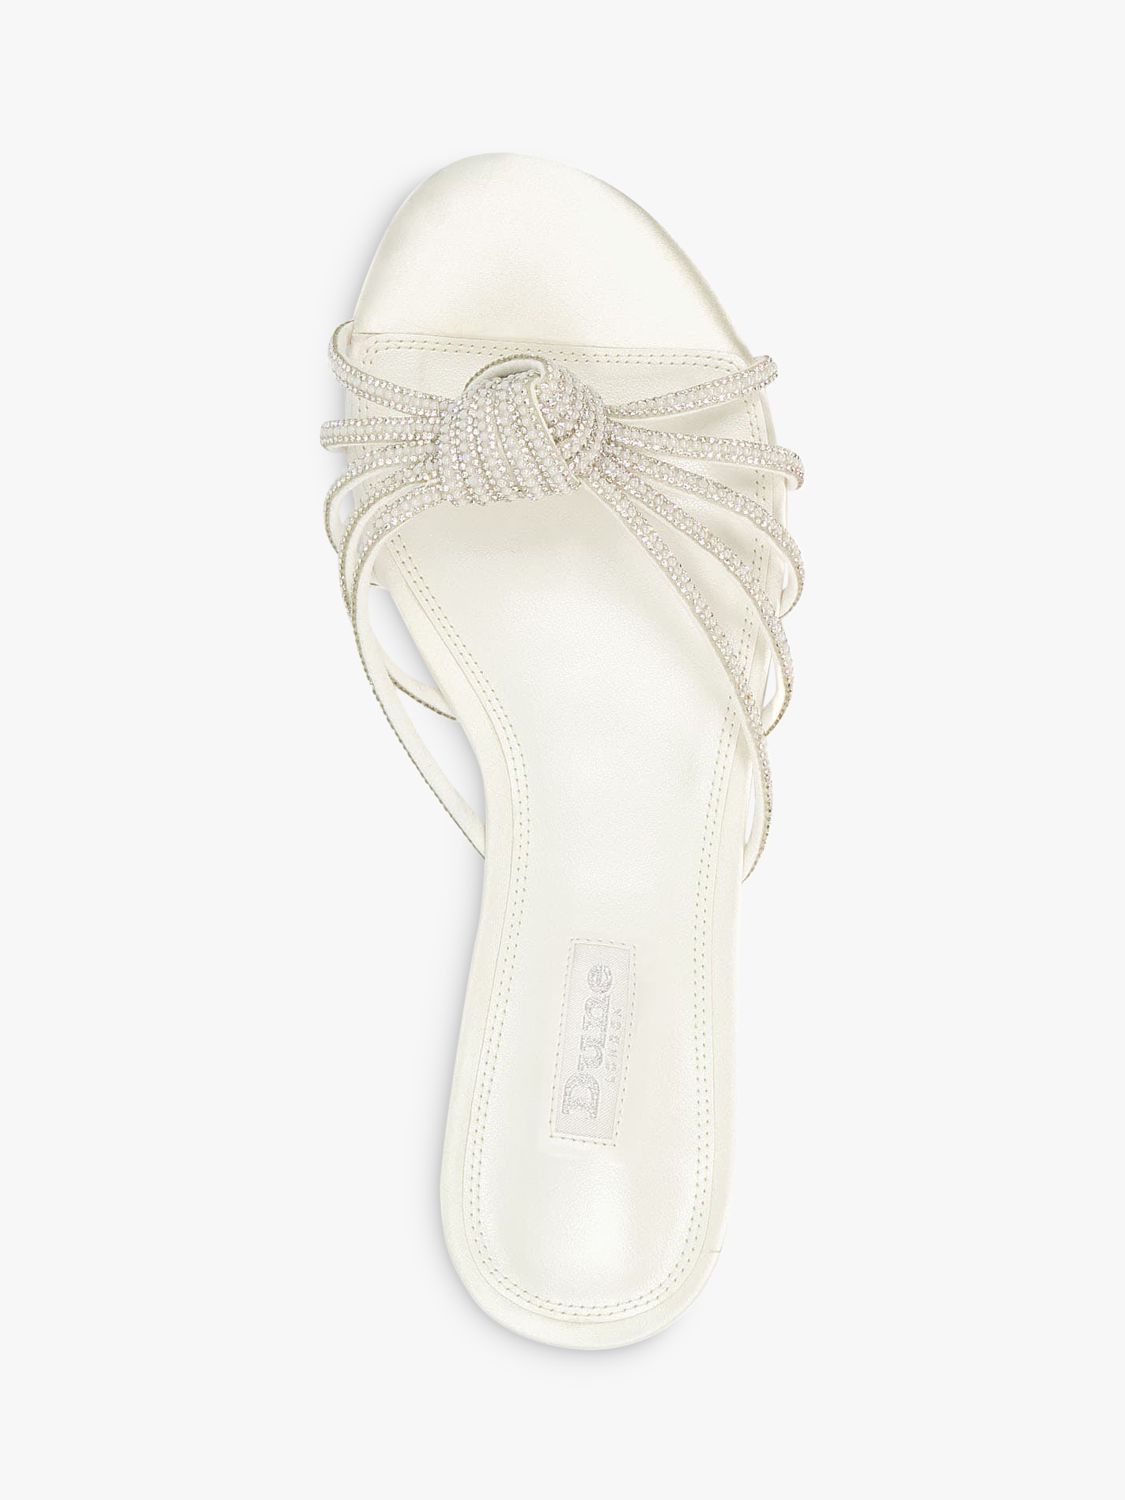 Dune Bridal Collection Newlie Crystal Knot Flat Satin Sandals, Ivory, 3